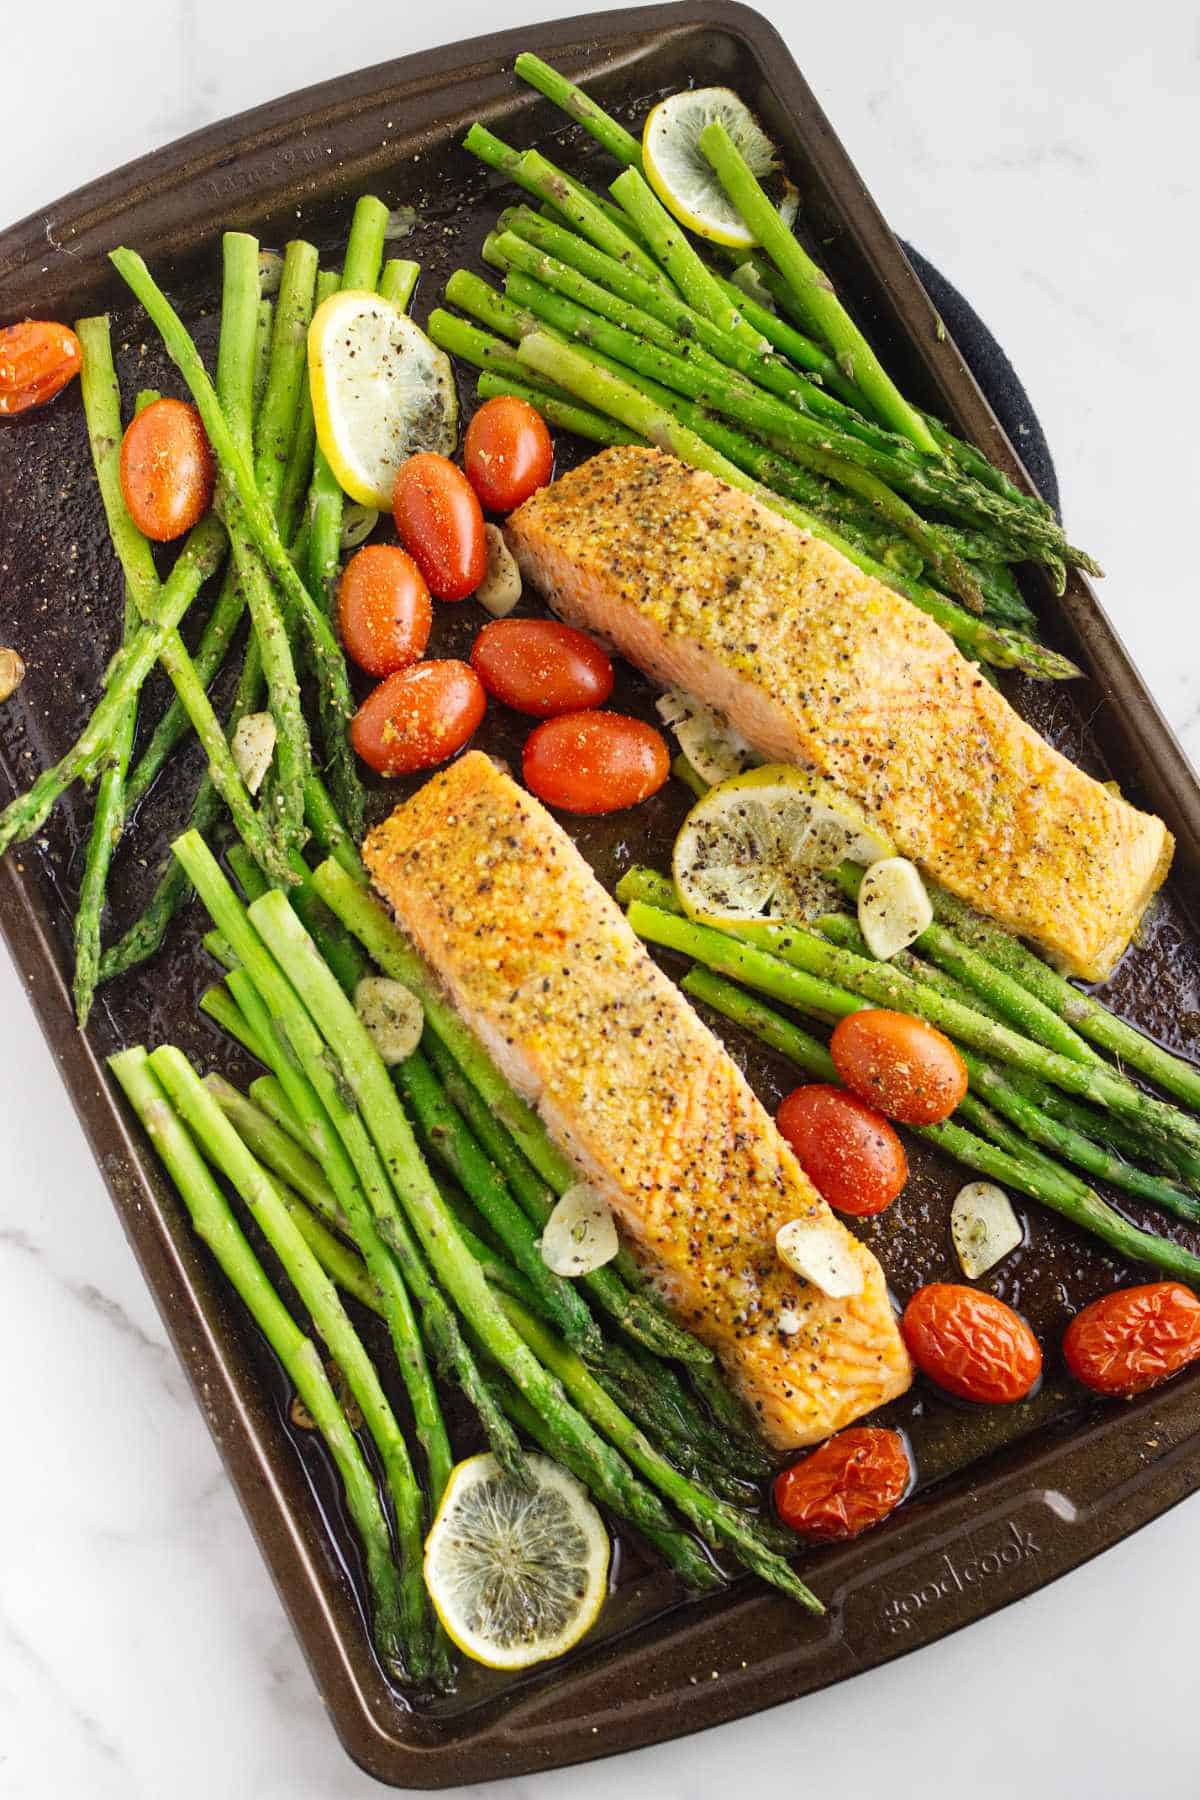 baking tray with roasted seasoned asparagus spears, sliced lemons, blistered tomatoes, and broiled fish filets.